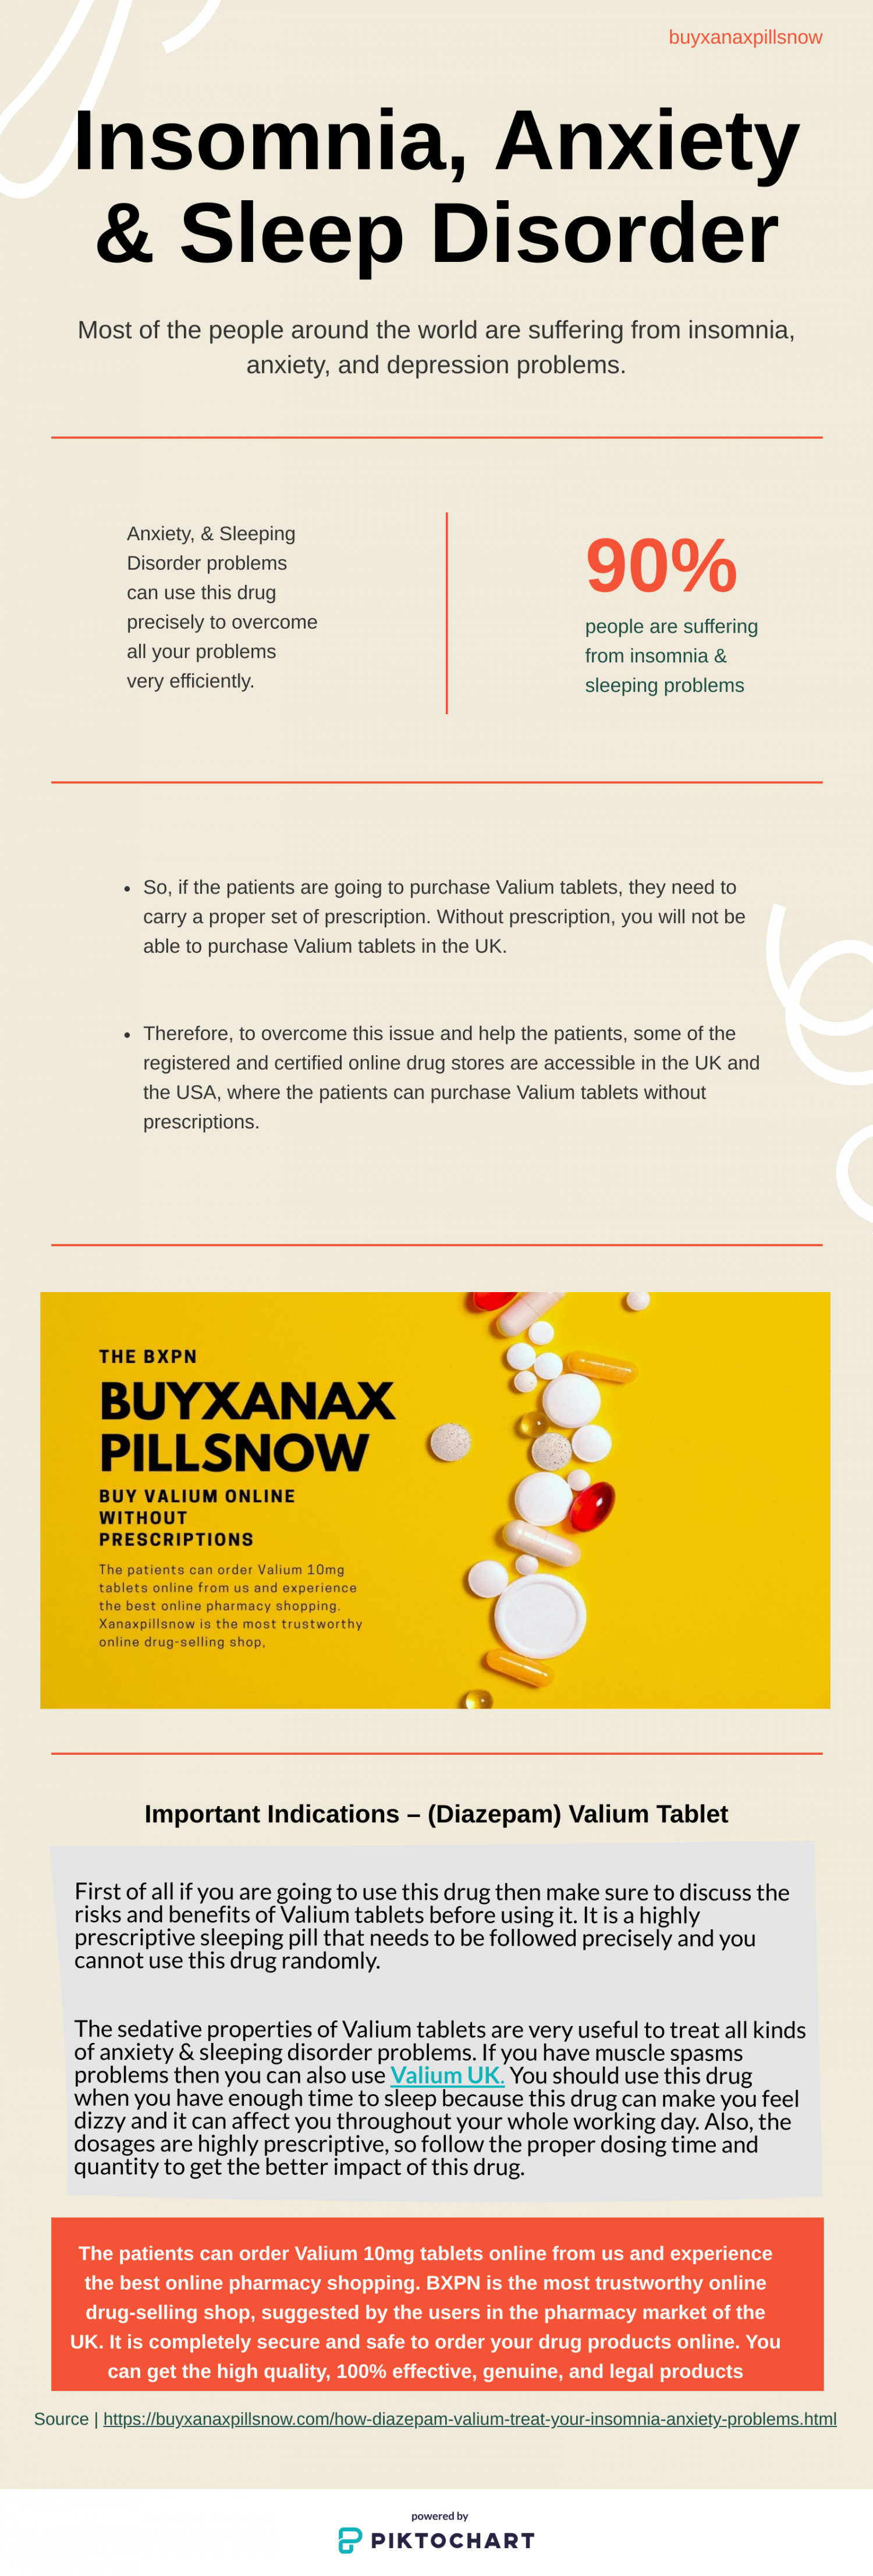 How (Diazepam) Valium Treat Your Insomnia & Anxiety Problems! Infographic